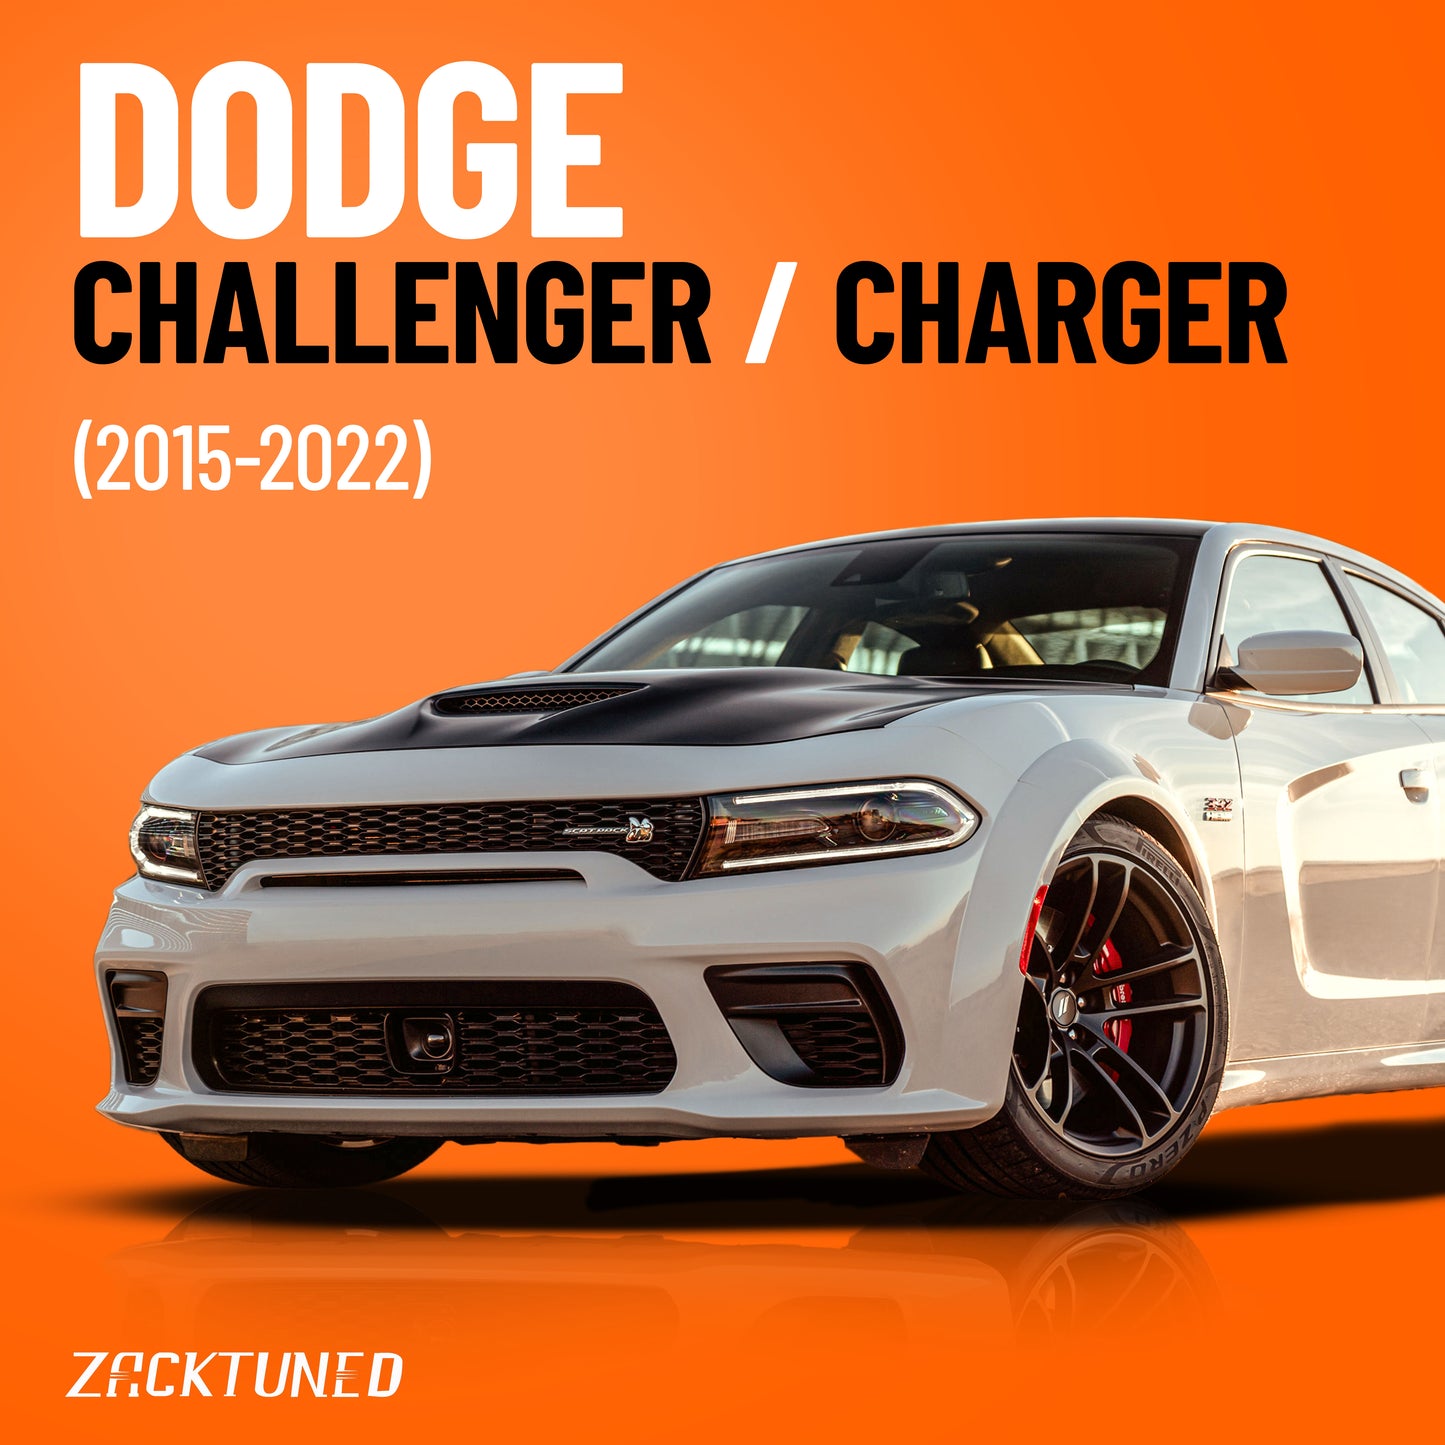 Dodge Challenger/Charger (2015-2022)